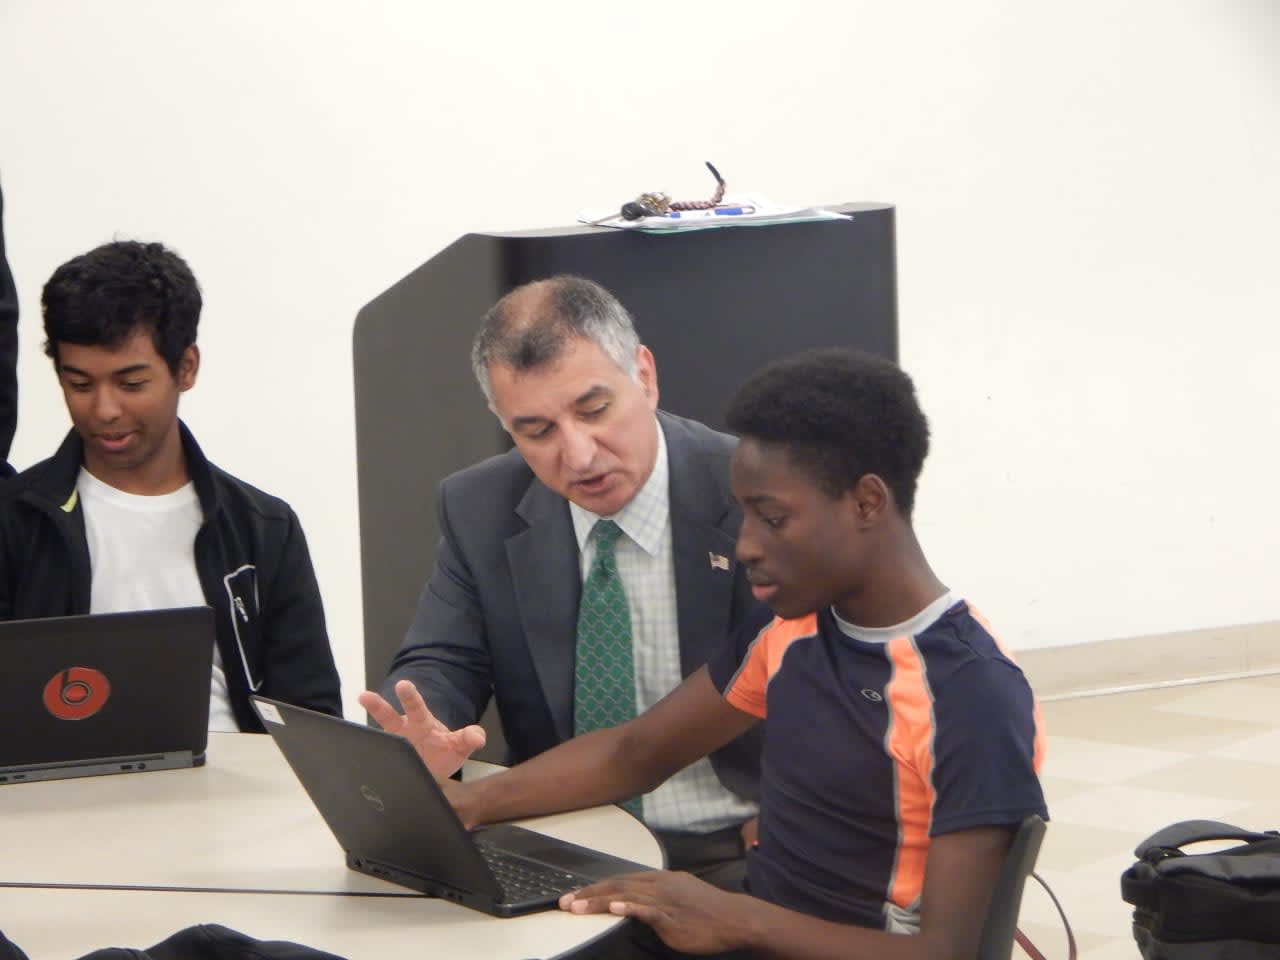 State Sen. Carlo Leone, shown mentoring a student at an SPEF meeting, is US Day 2016 honorary chair.